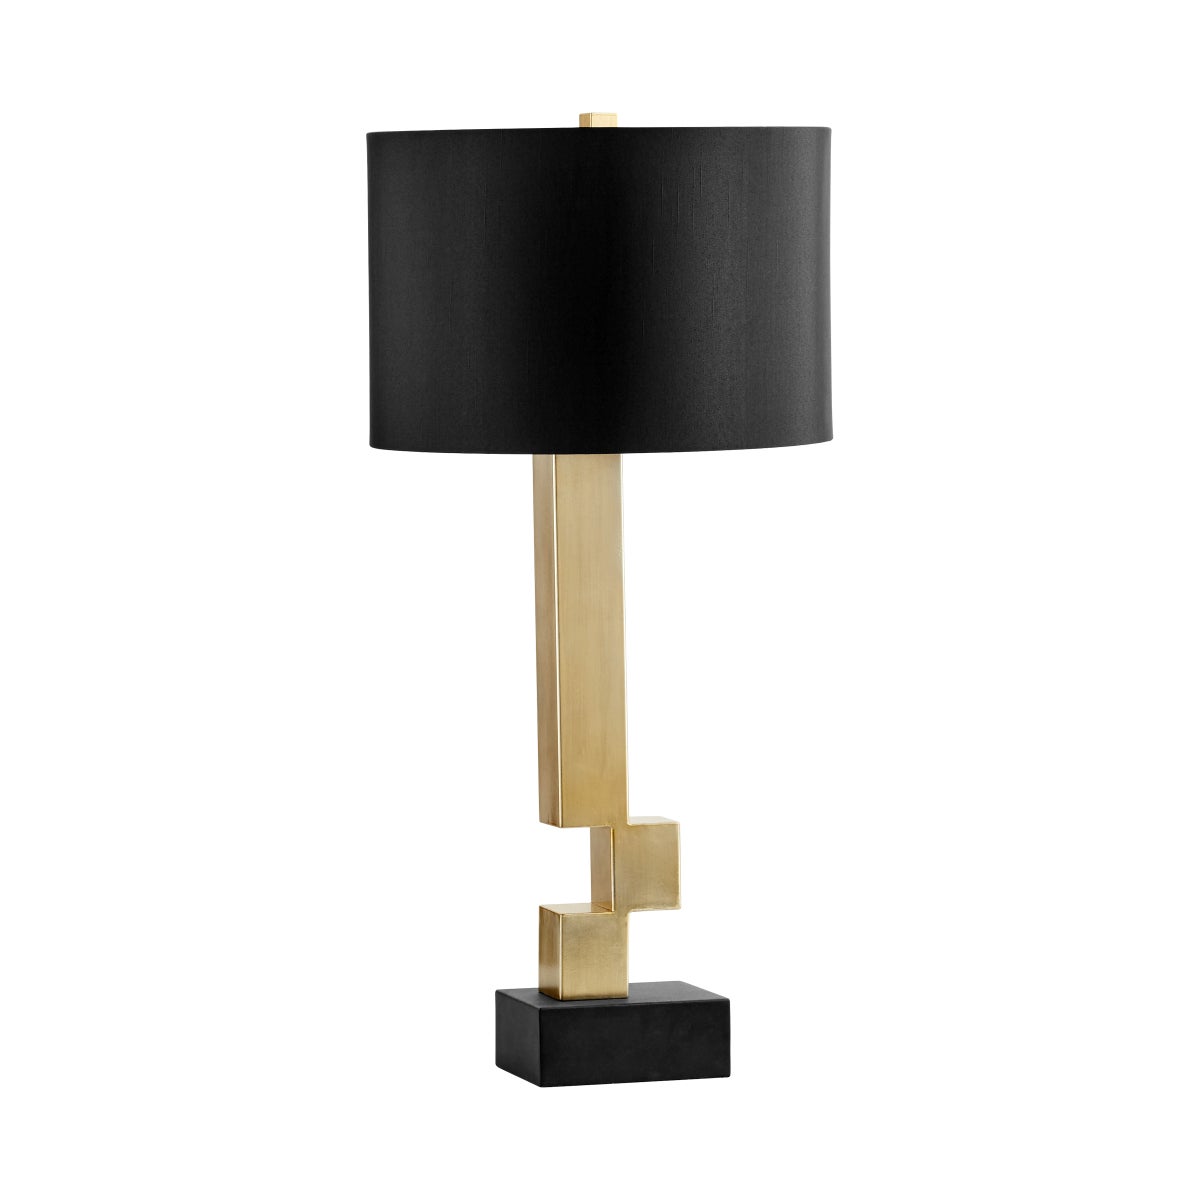 Rendezvous Table Lamp